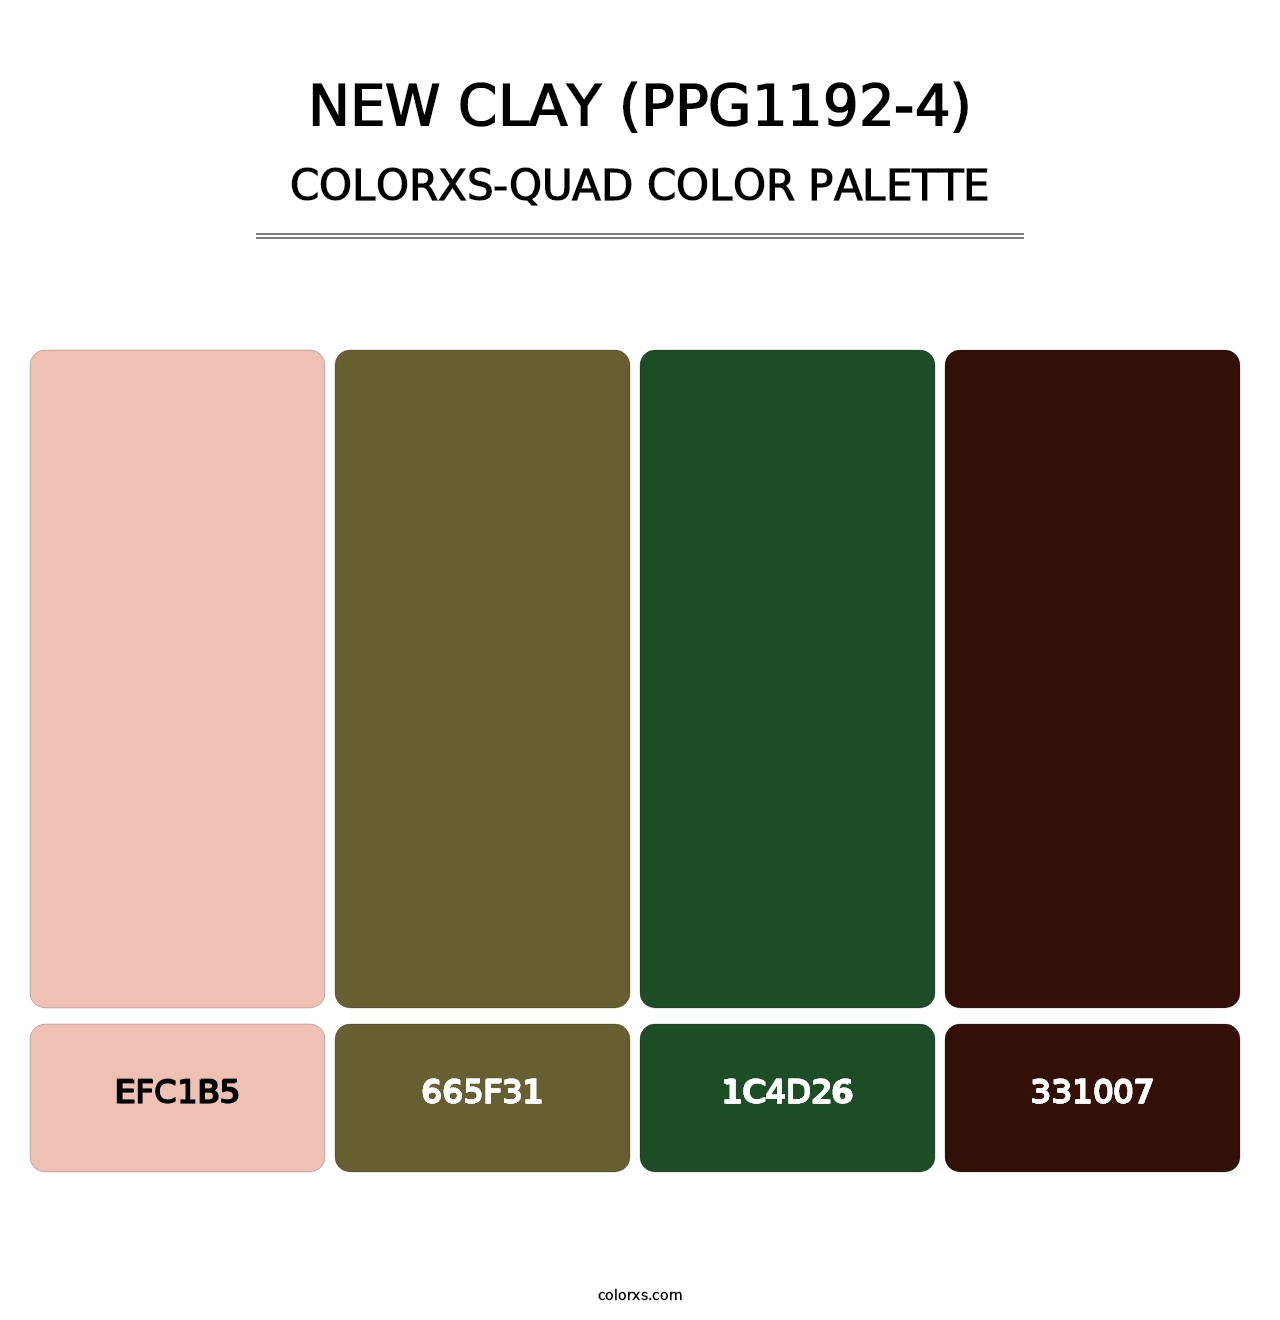 New Clay (PPG1192-4) - Colorxs Quad Palette